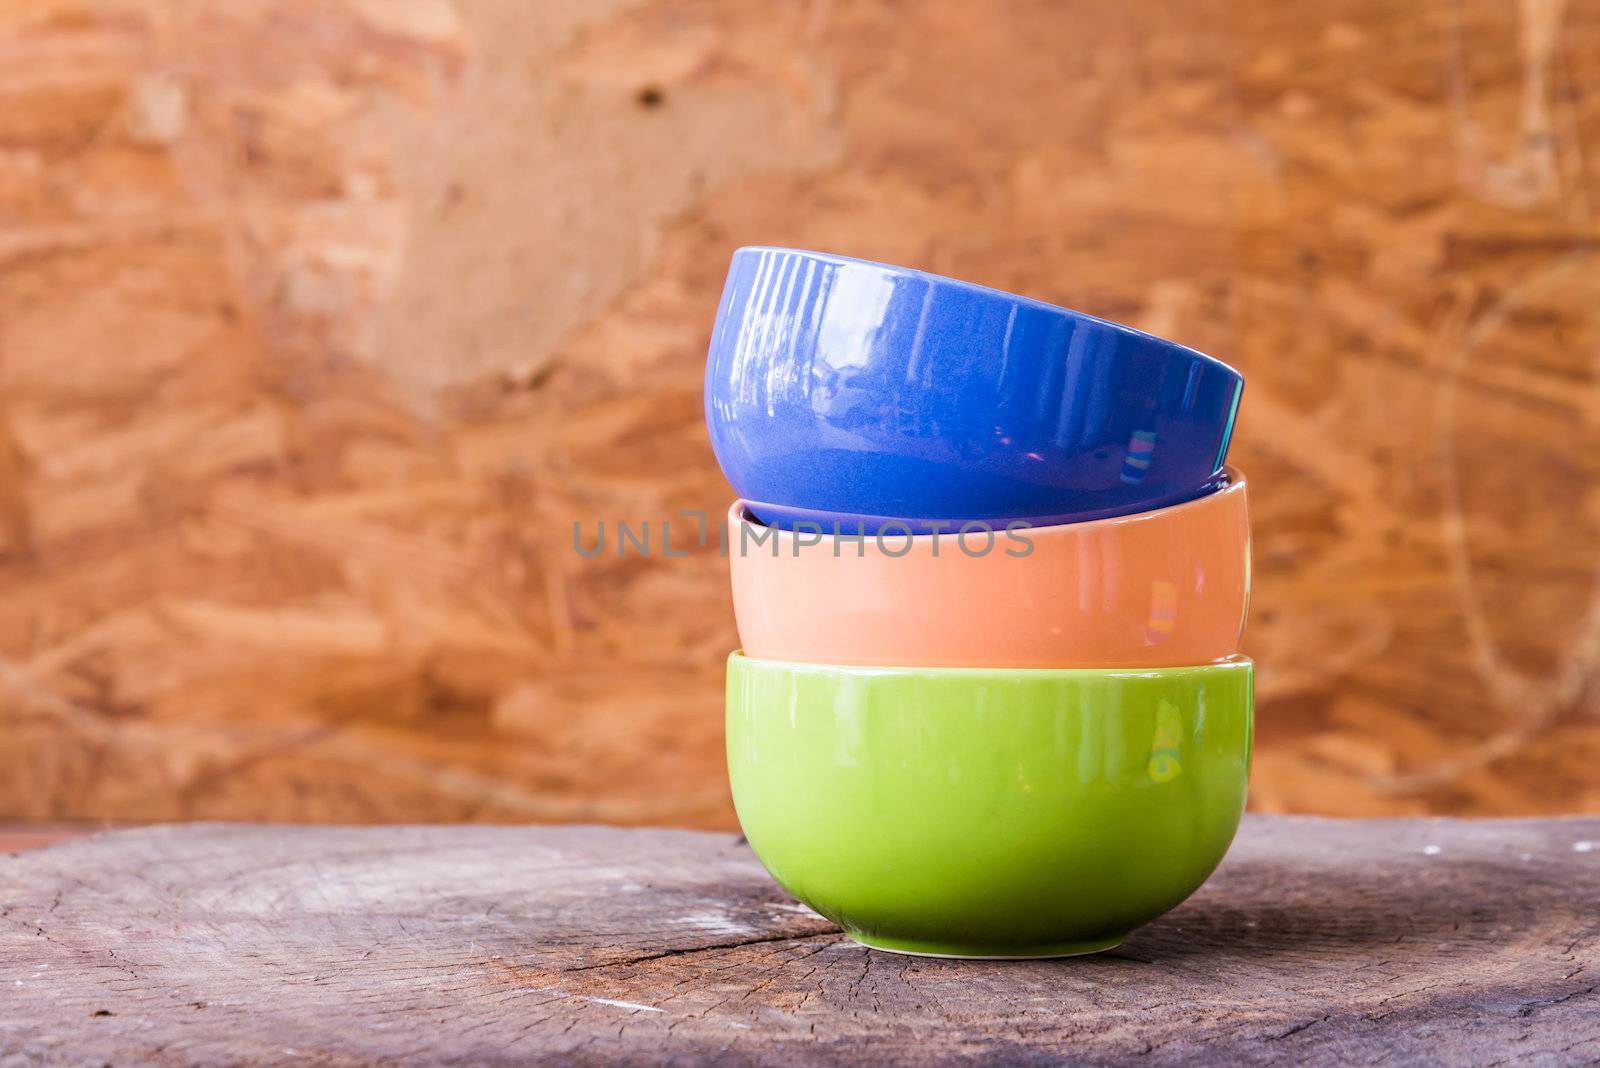 Beautiful color cups on wood background by wmitrmatr